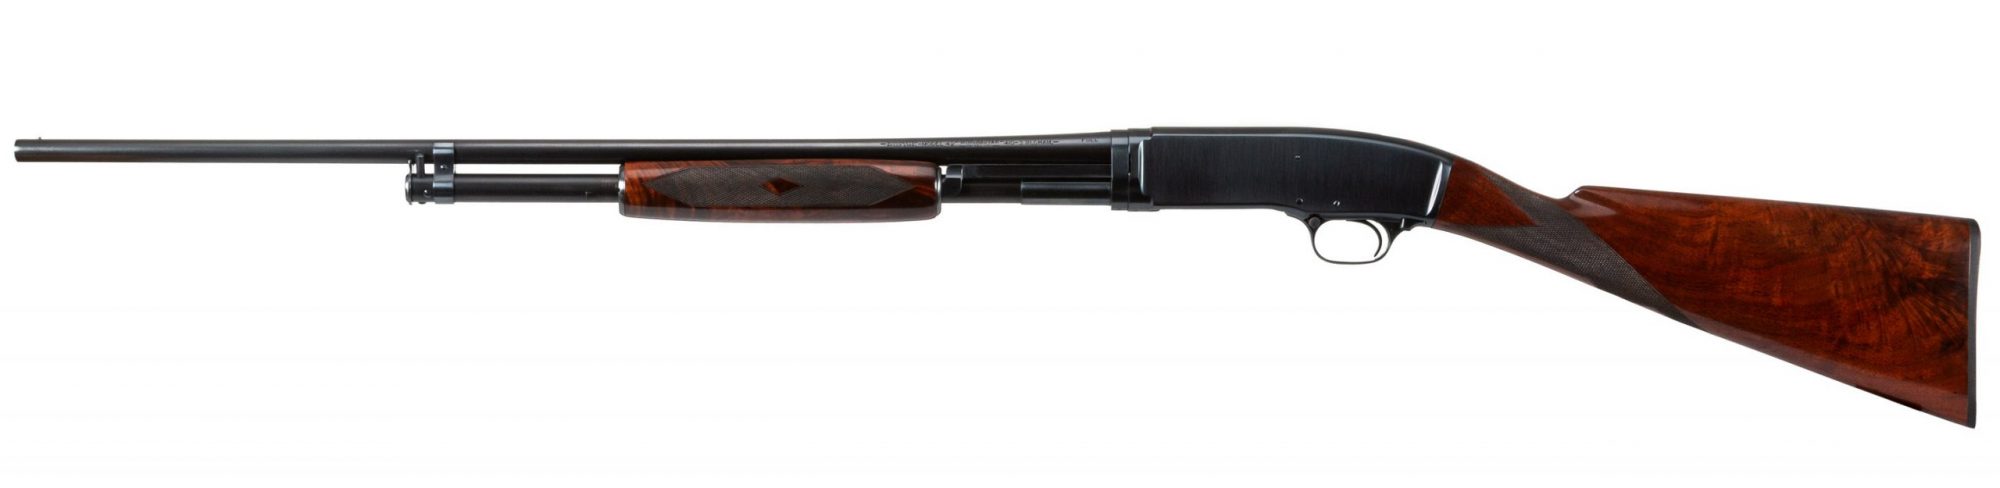 Photo of a Winchester Model 42, restored by Turnbull Restoration and featuring all period-correct finishes including charcoal bluing